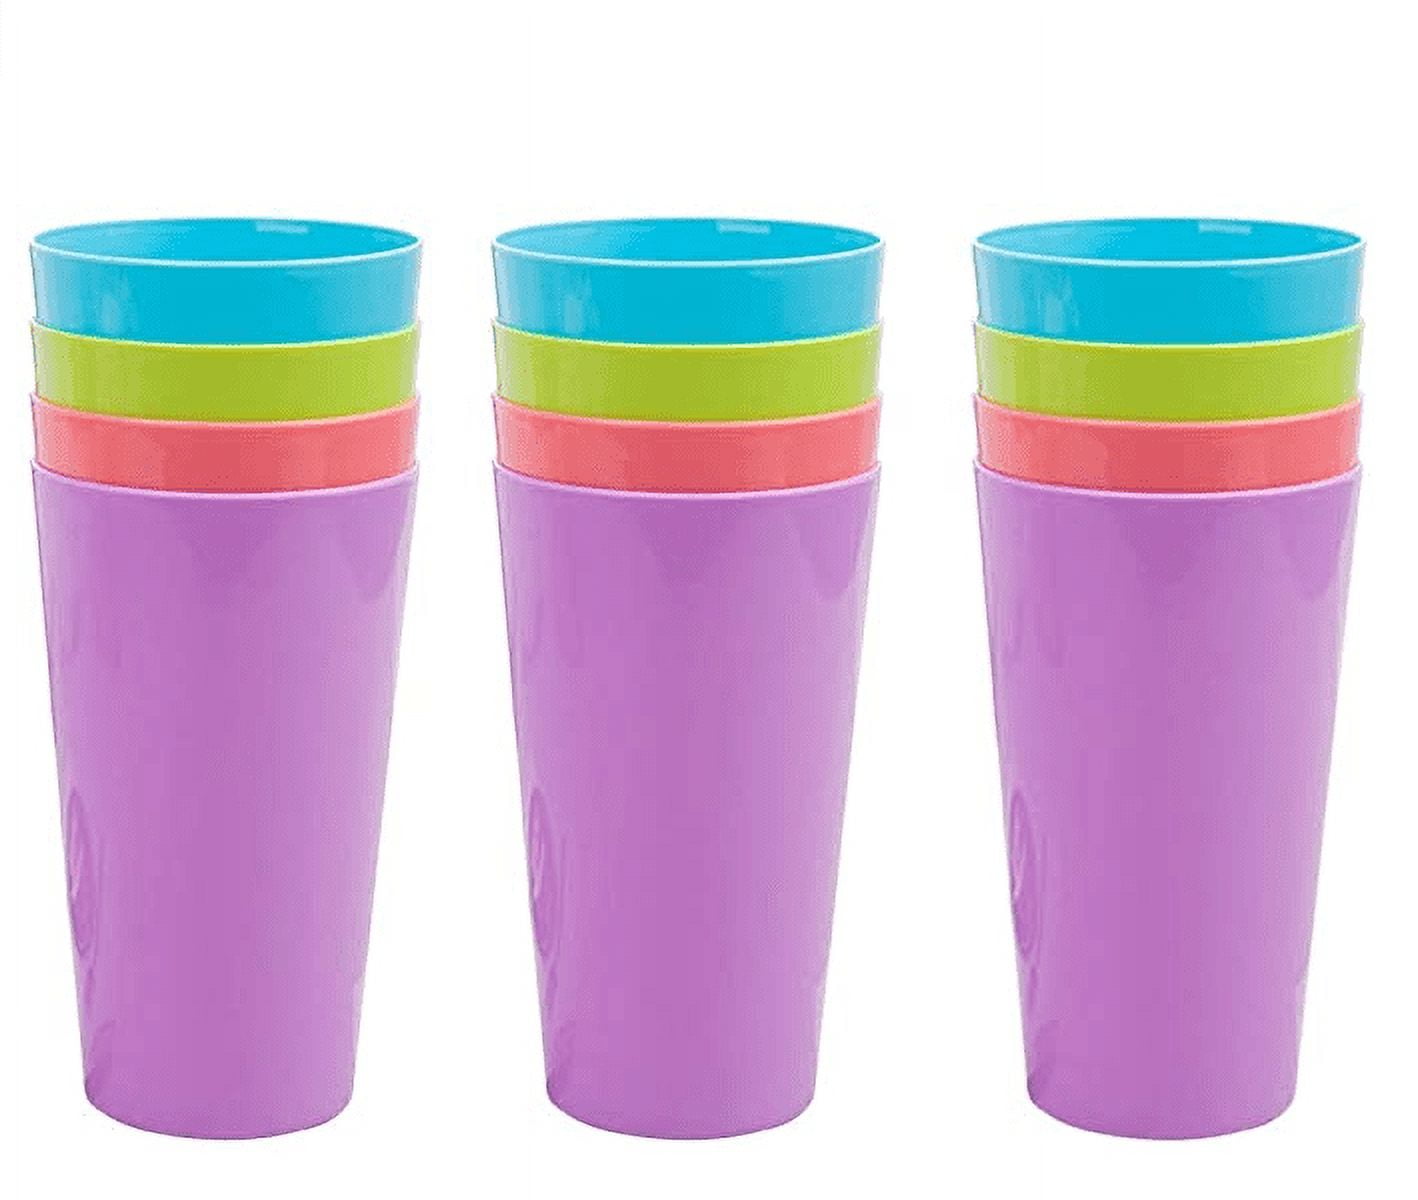 AOYITE Large Plastic Cups Reusable - 32 oz Plastic Tumblers  Unbreakable Drinking Glasses set of 12 - BPA Free Dishwasher Safe Big  Plastic Cups for Kids Kitchen Camping Party Outdoor